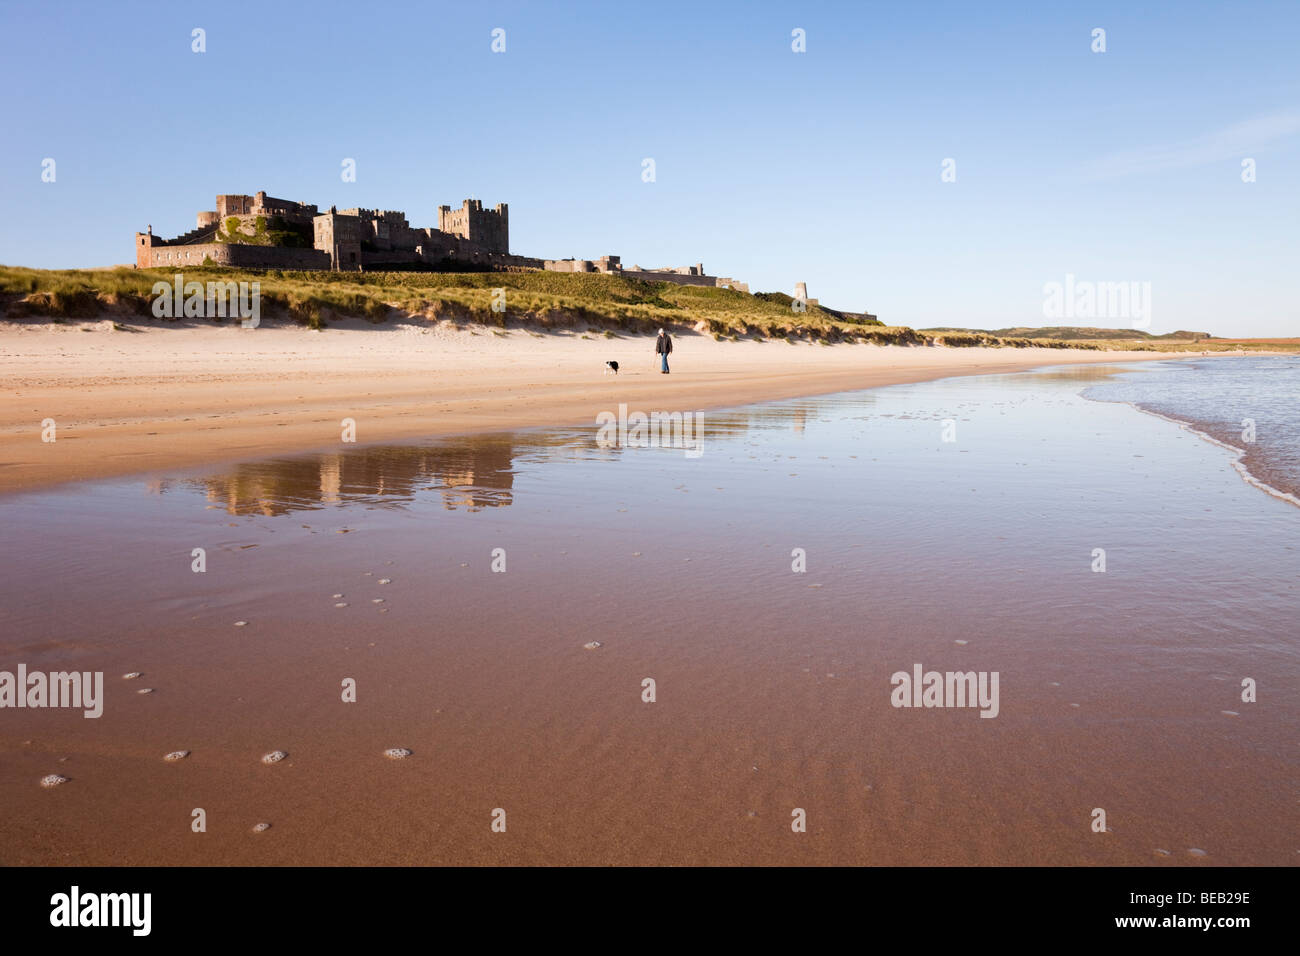 View along quiet sandy beach with Bamburgh Castle reflected in wet sand on foreshore with a person walking a dog. Bamburgh Northumberland England UK Stock Photo